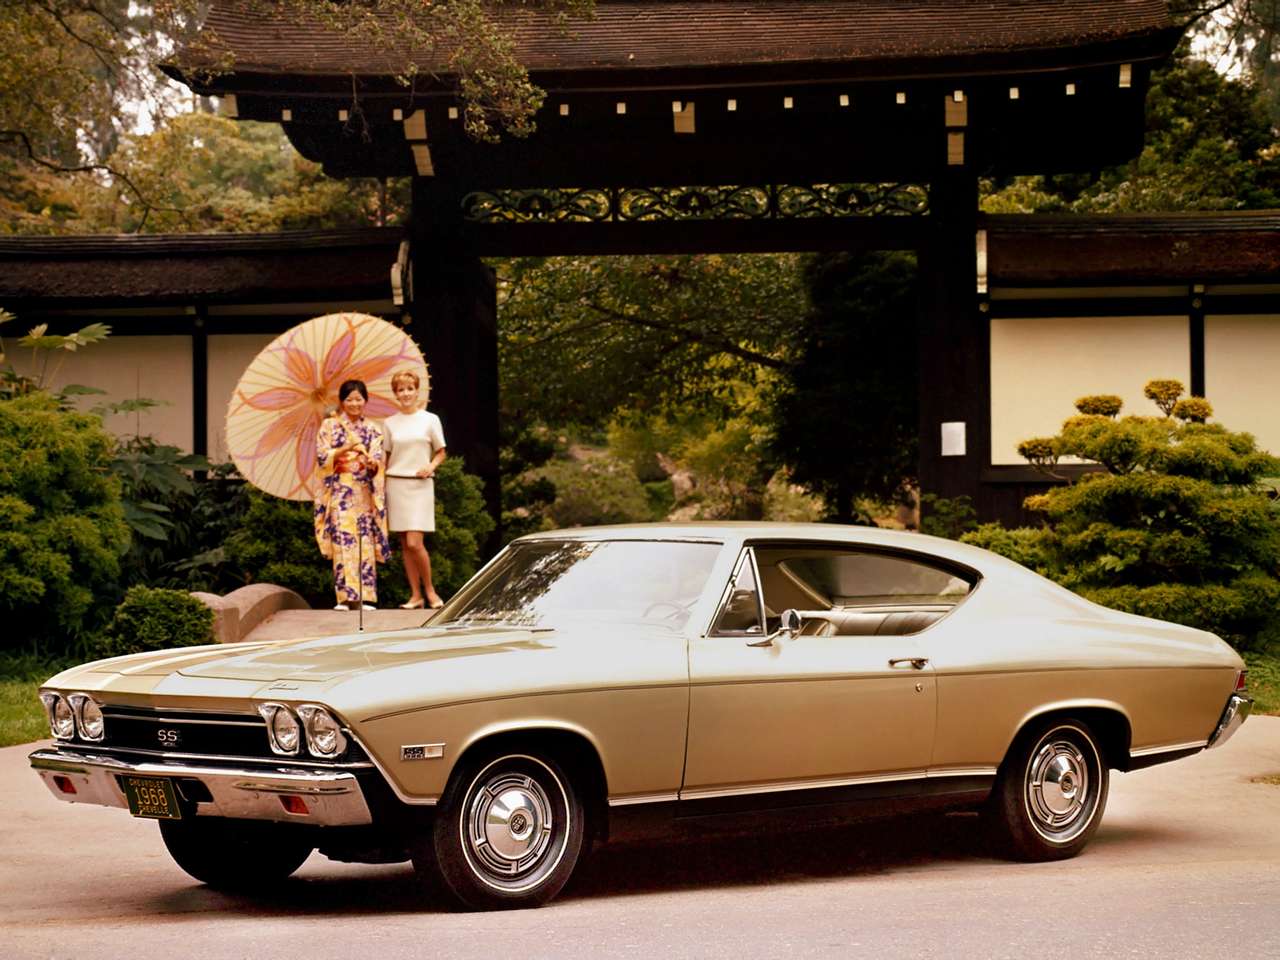 1968 Chevrolet Chevelle Malibu SS Hardtop Coupe jigsaw puzzle online